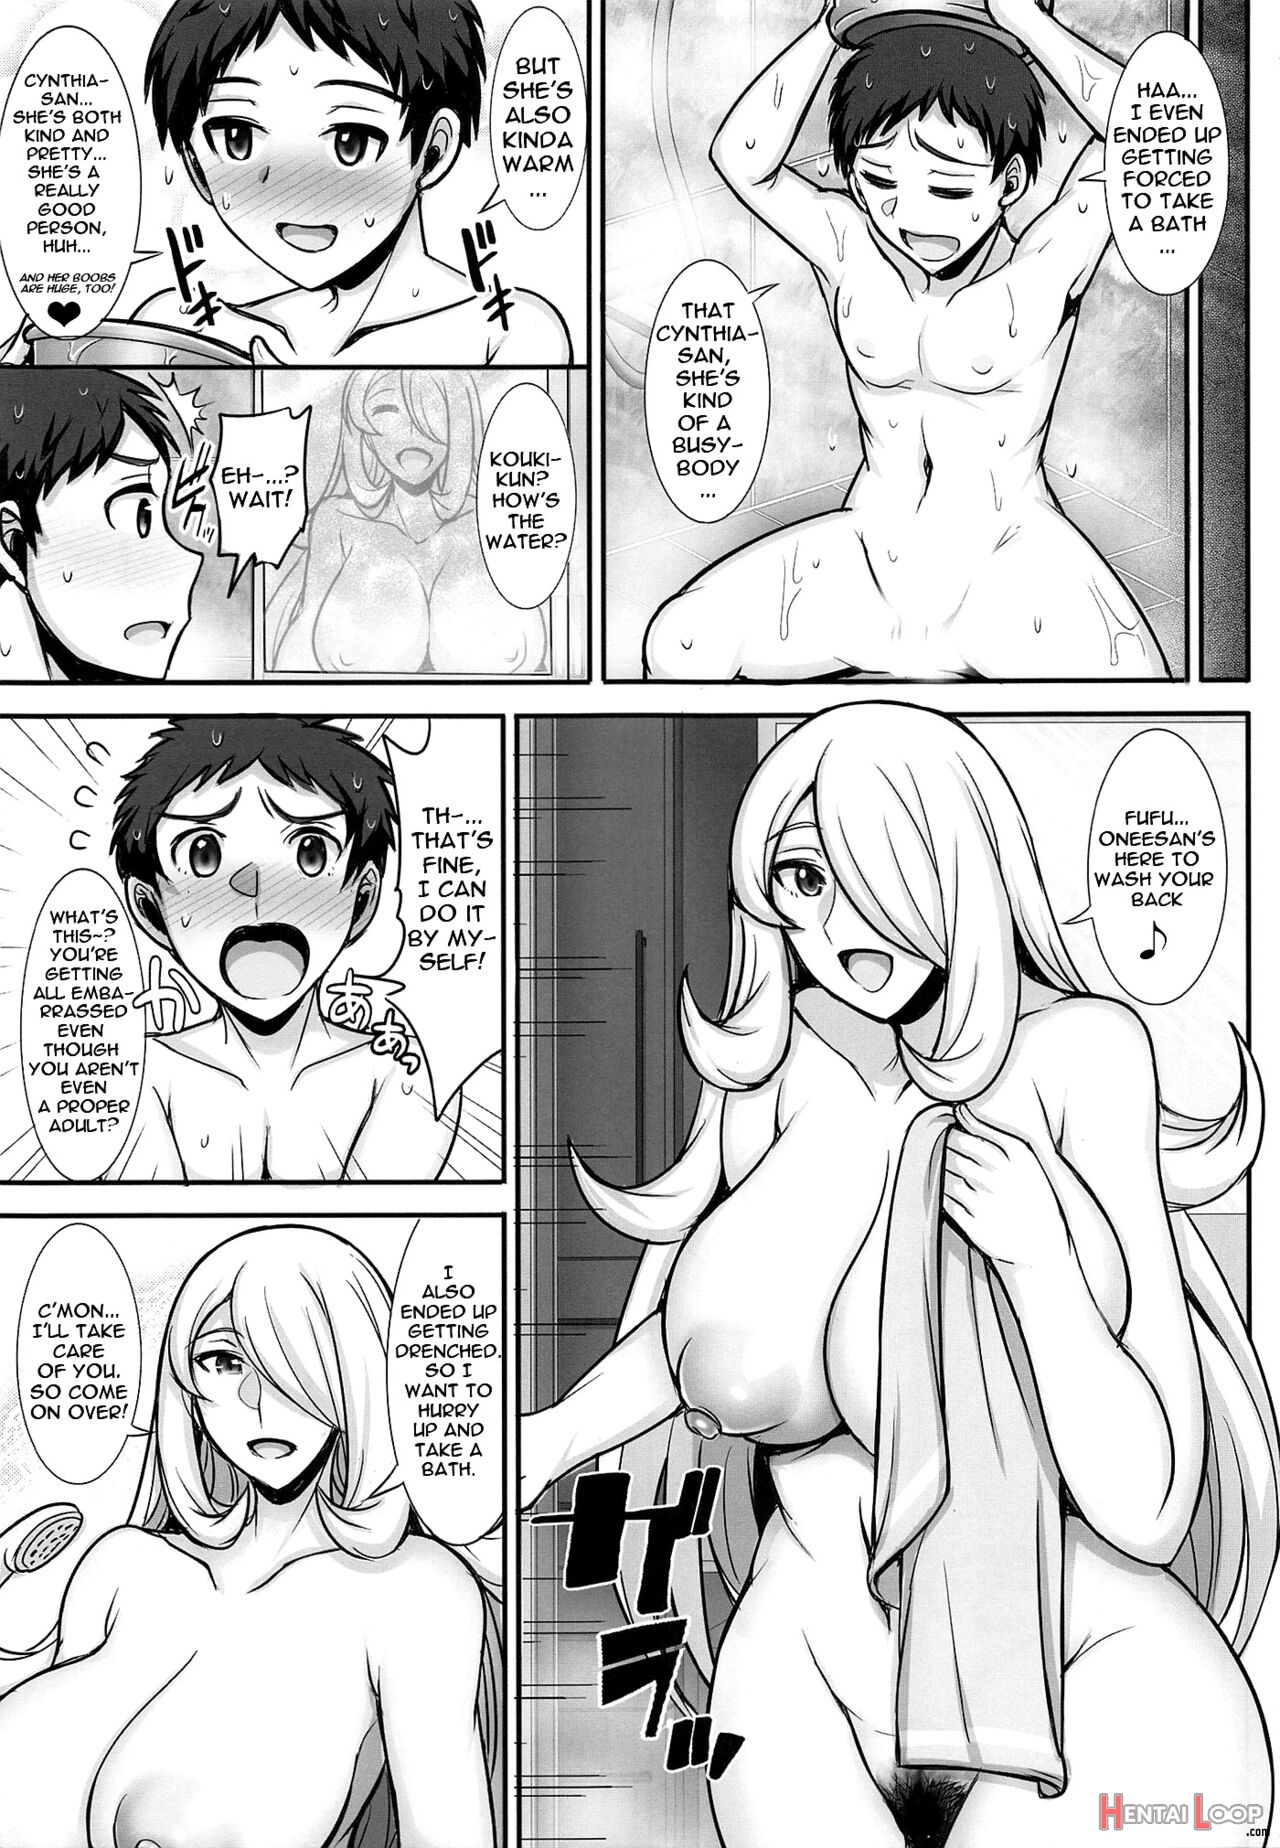 Doing It With Cynthia-san In The Bath... page 4